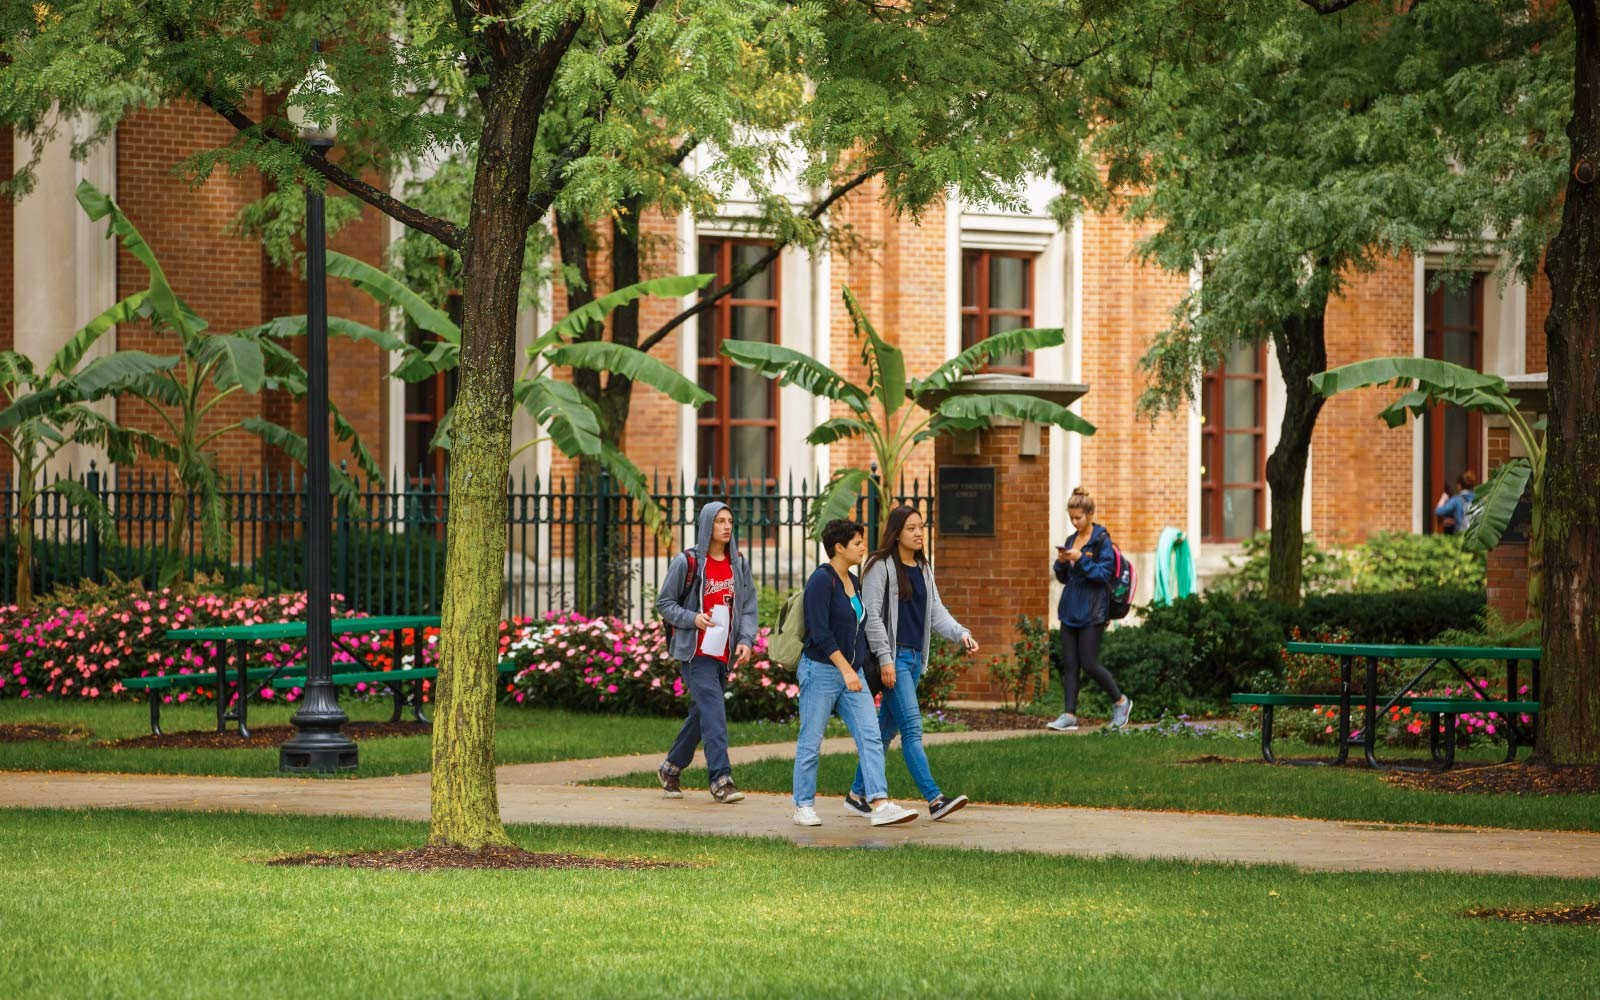 Students walking in the Lincoln Park campus.